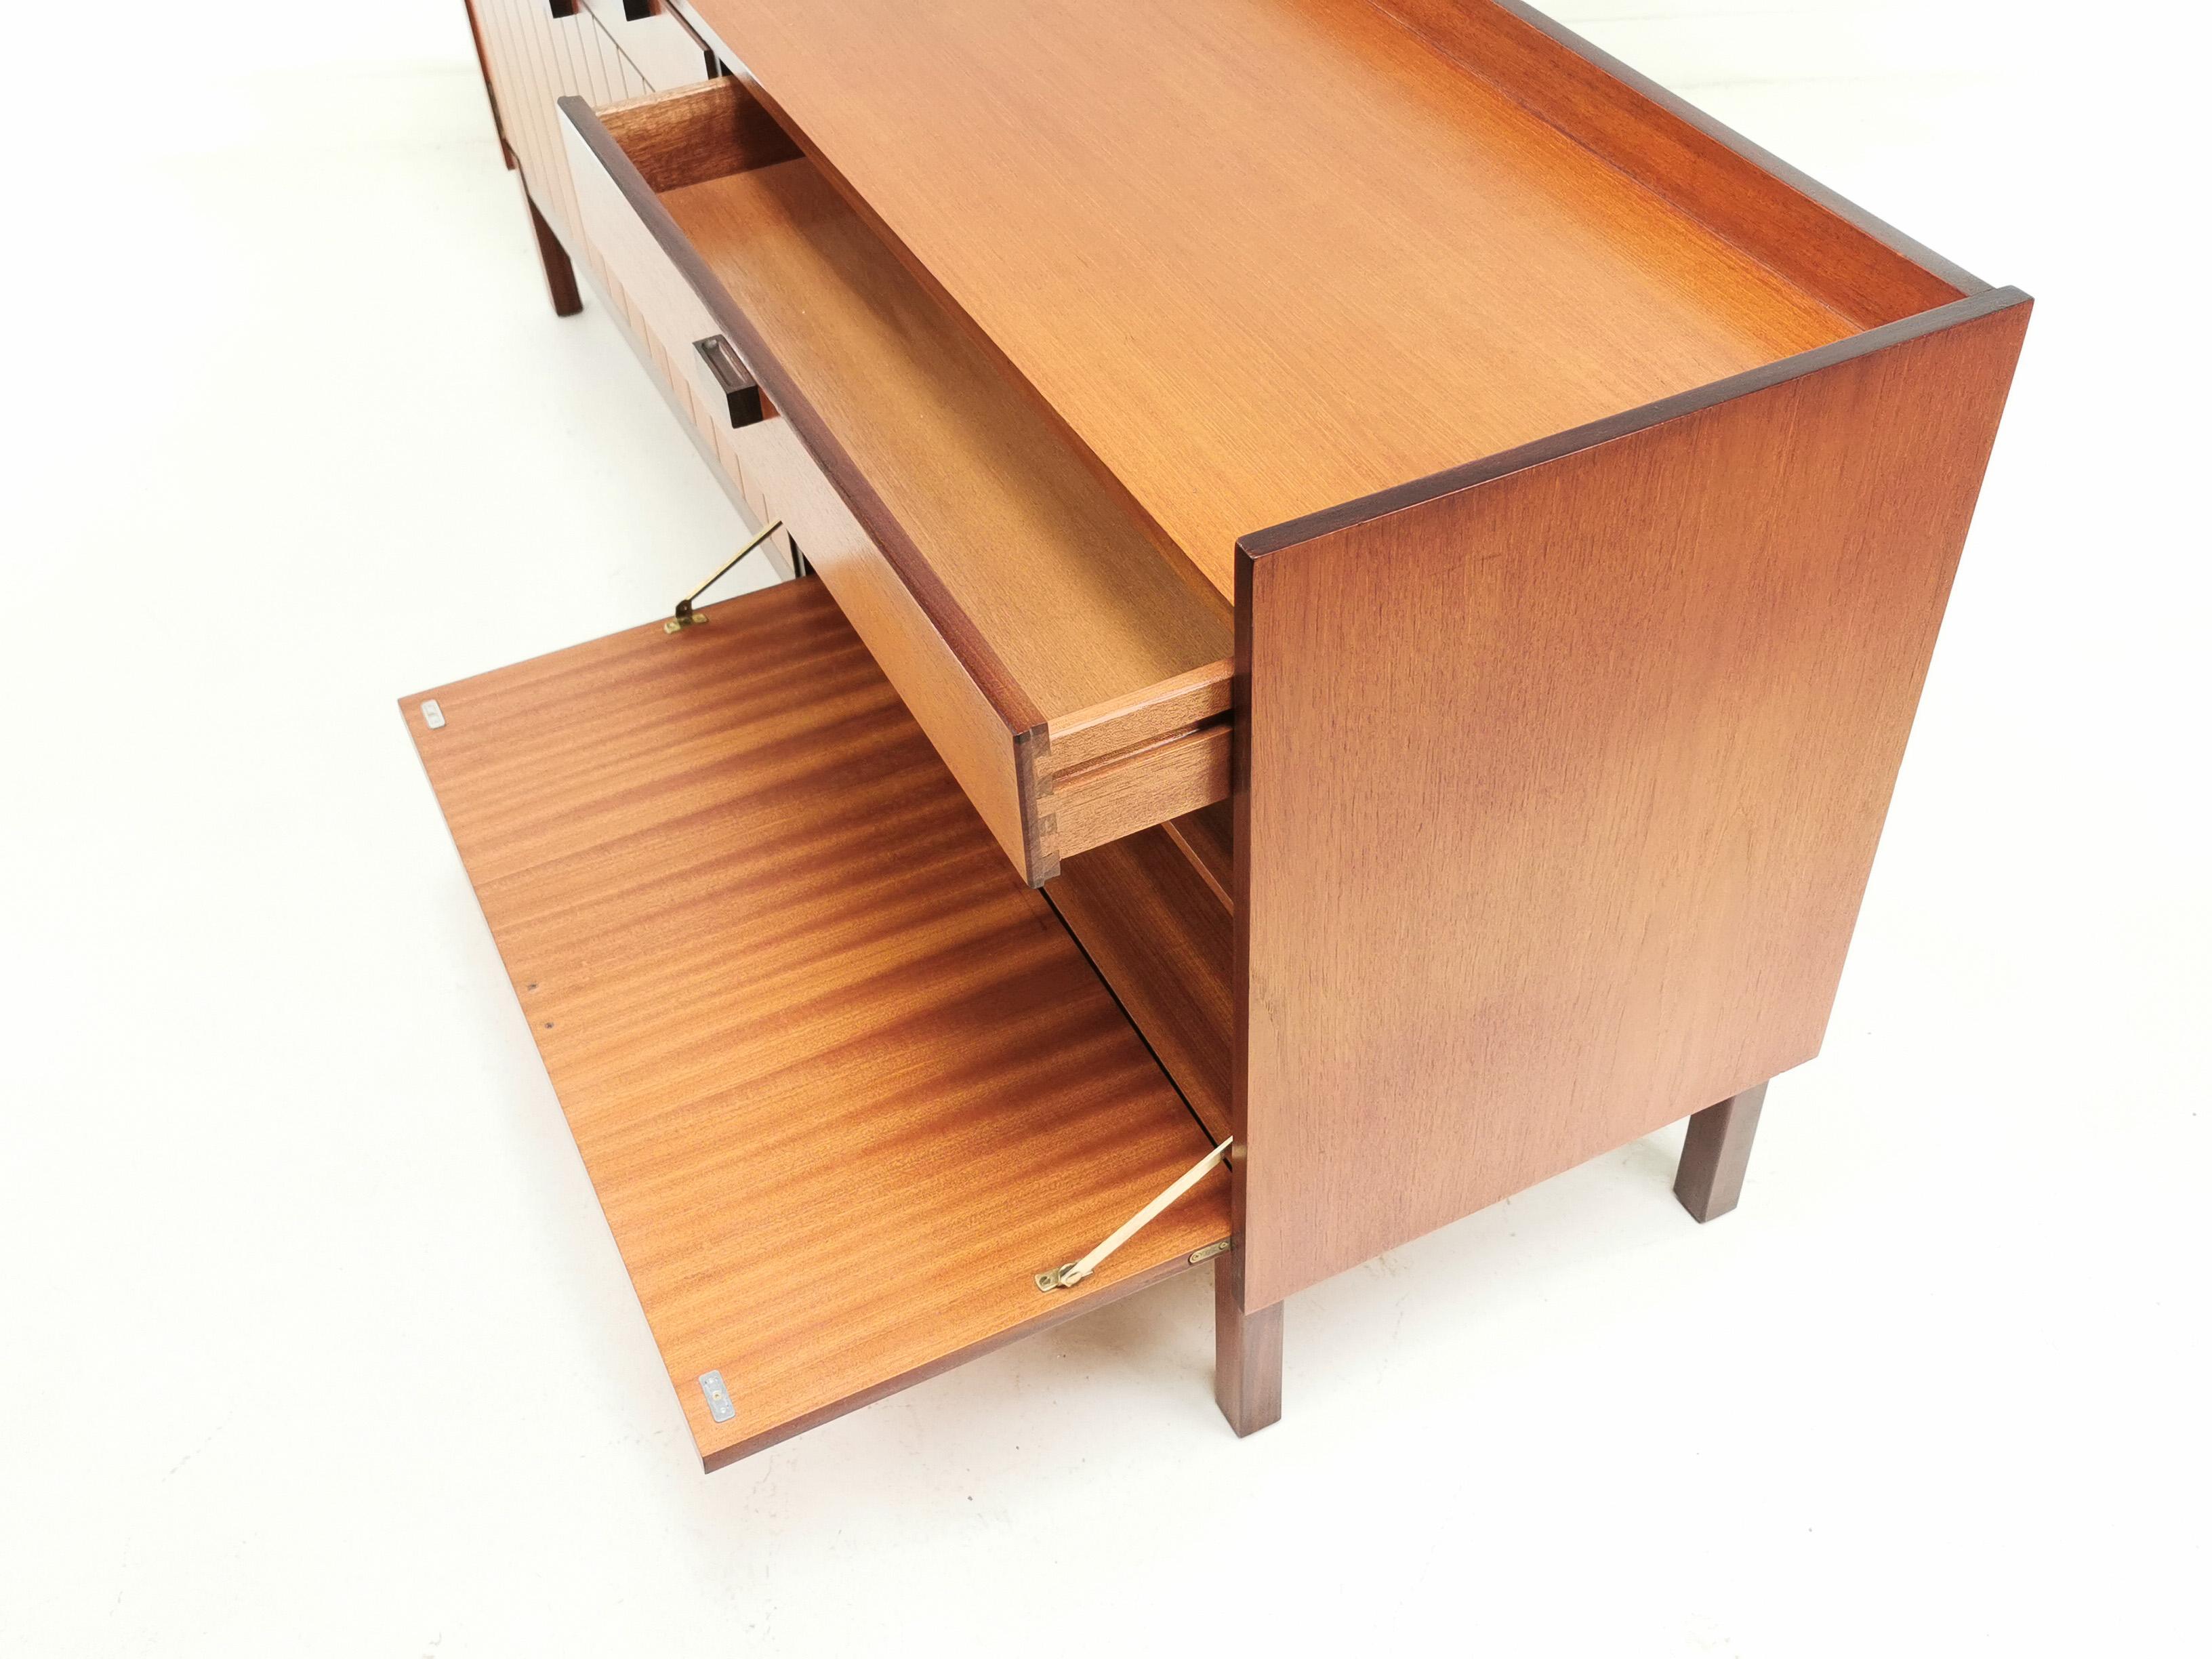 Meredew teak sideboard 

British made, Danish design mid century 1960s eye catching teaksideboard by Meredew.

A rectangular top above two spacious drawers, two cupboard doors to the left and drinks cabinet to the right.

Very unique design,